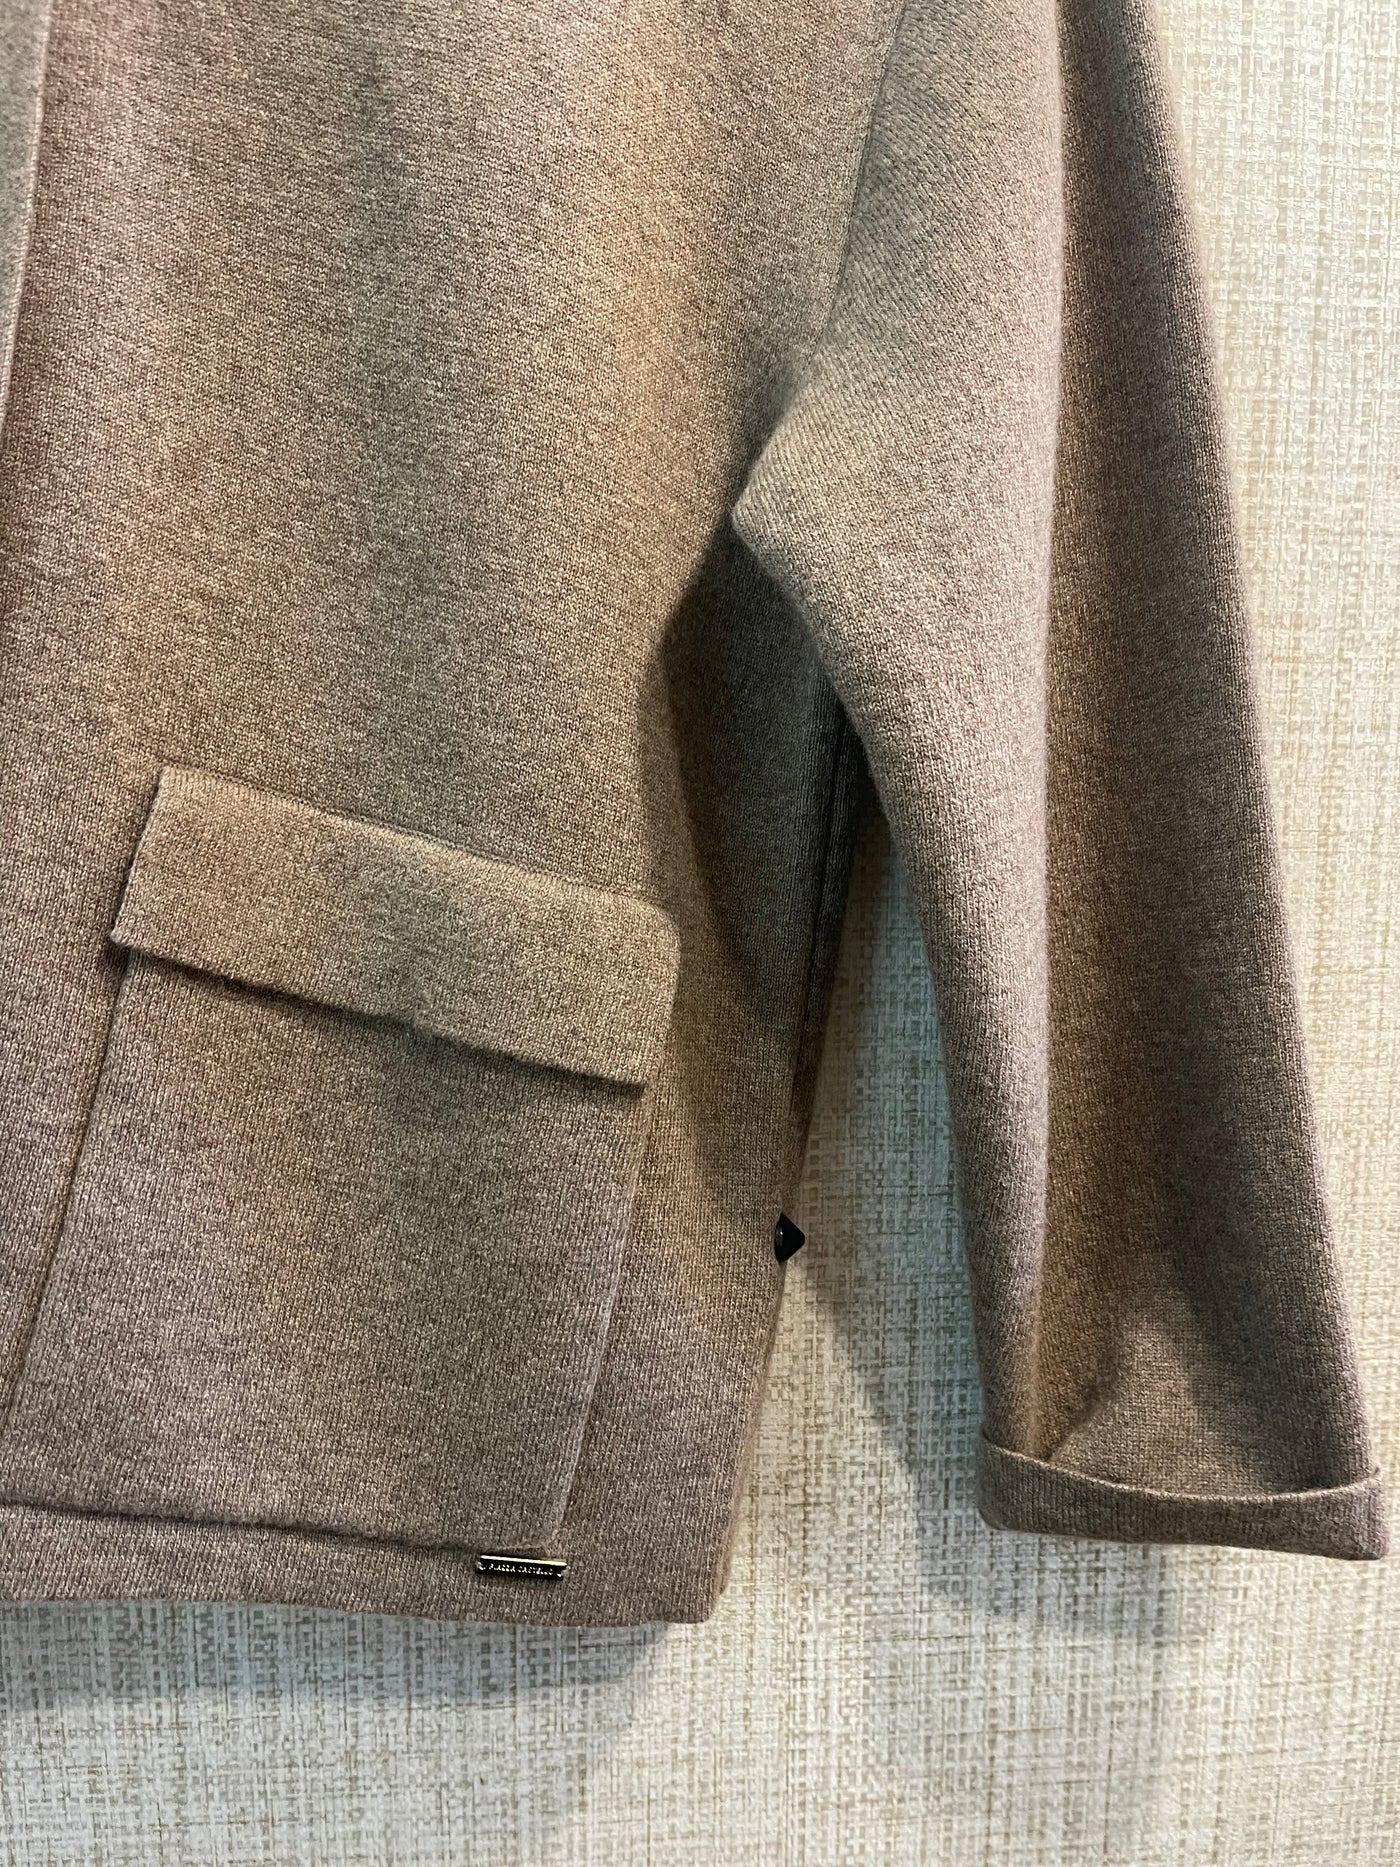 Piazza Castello | The Finest Women's Cashmere Clothing